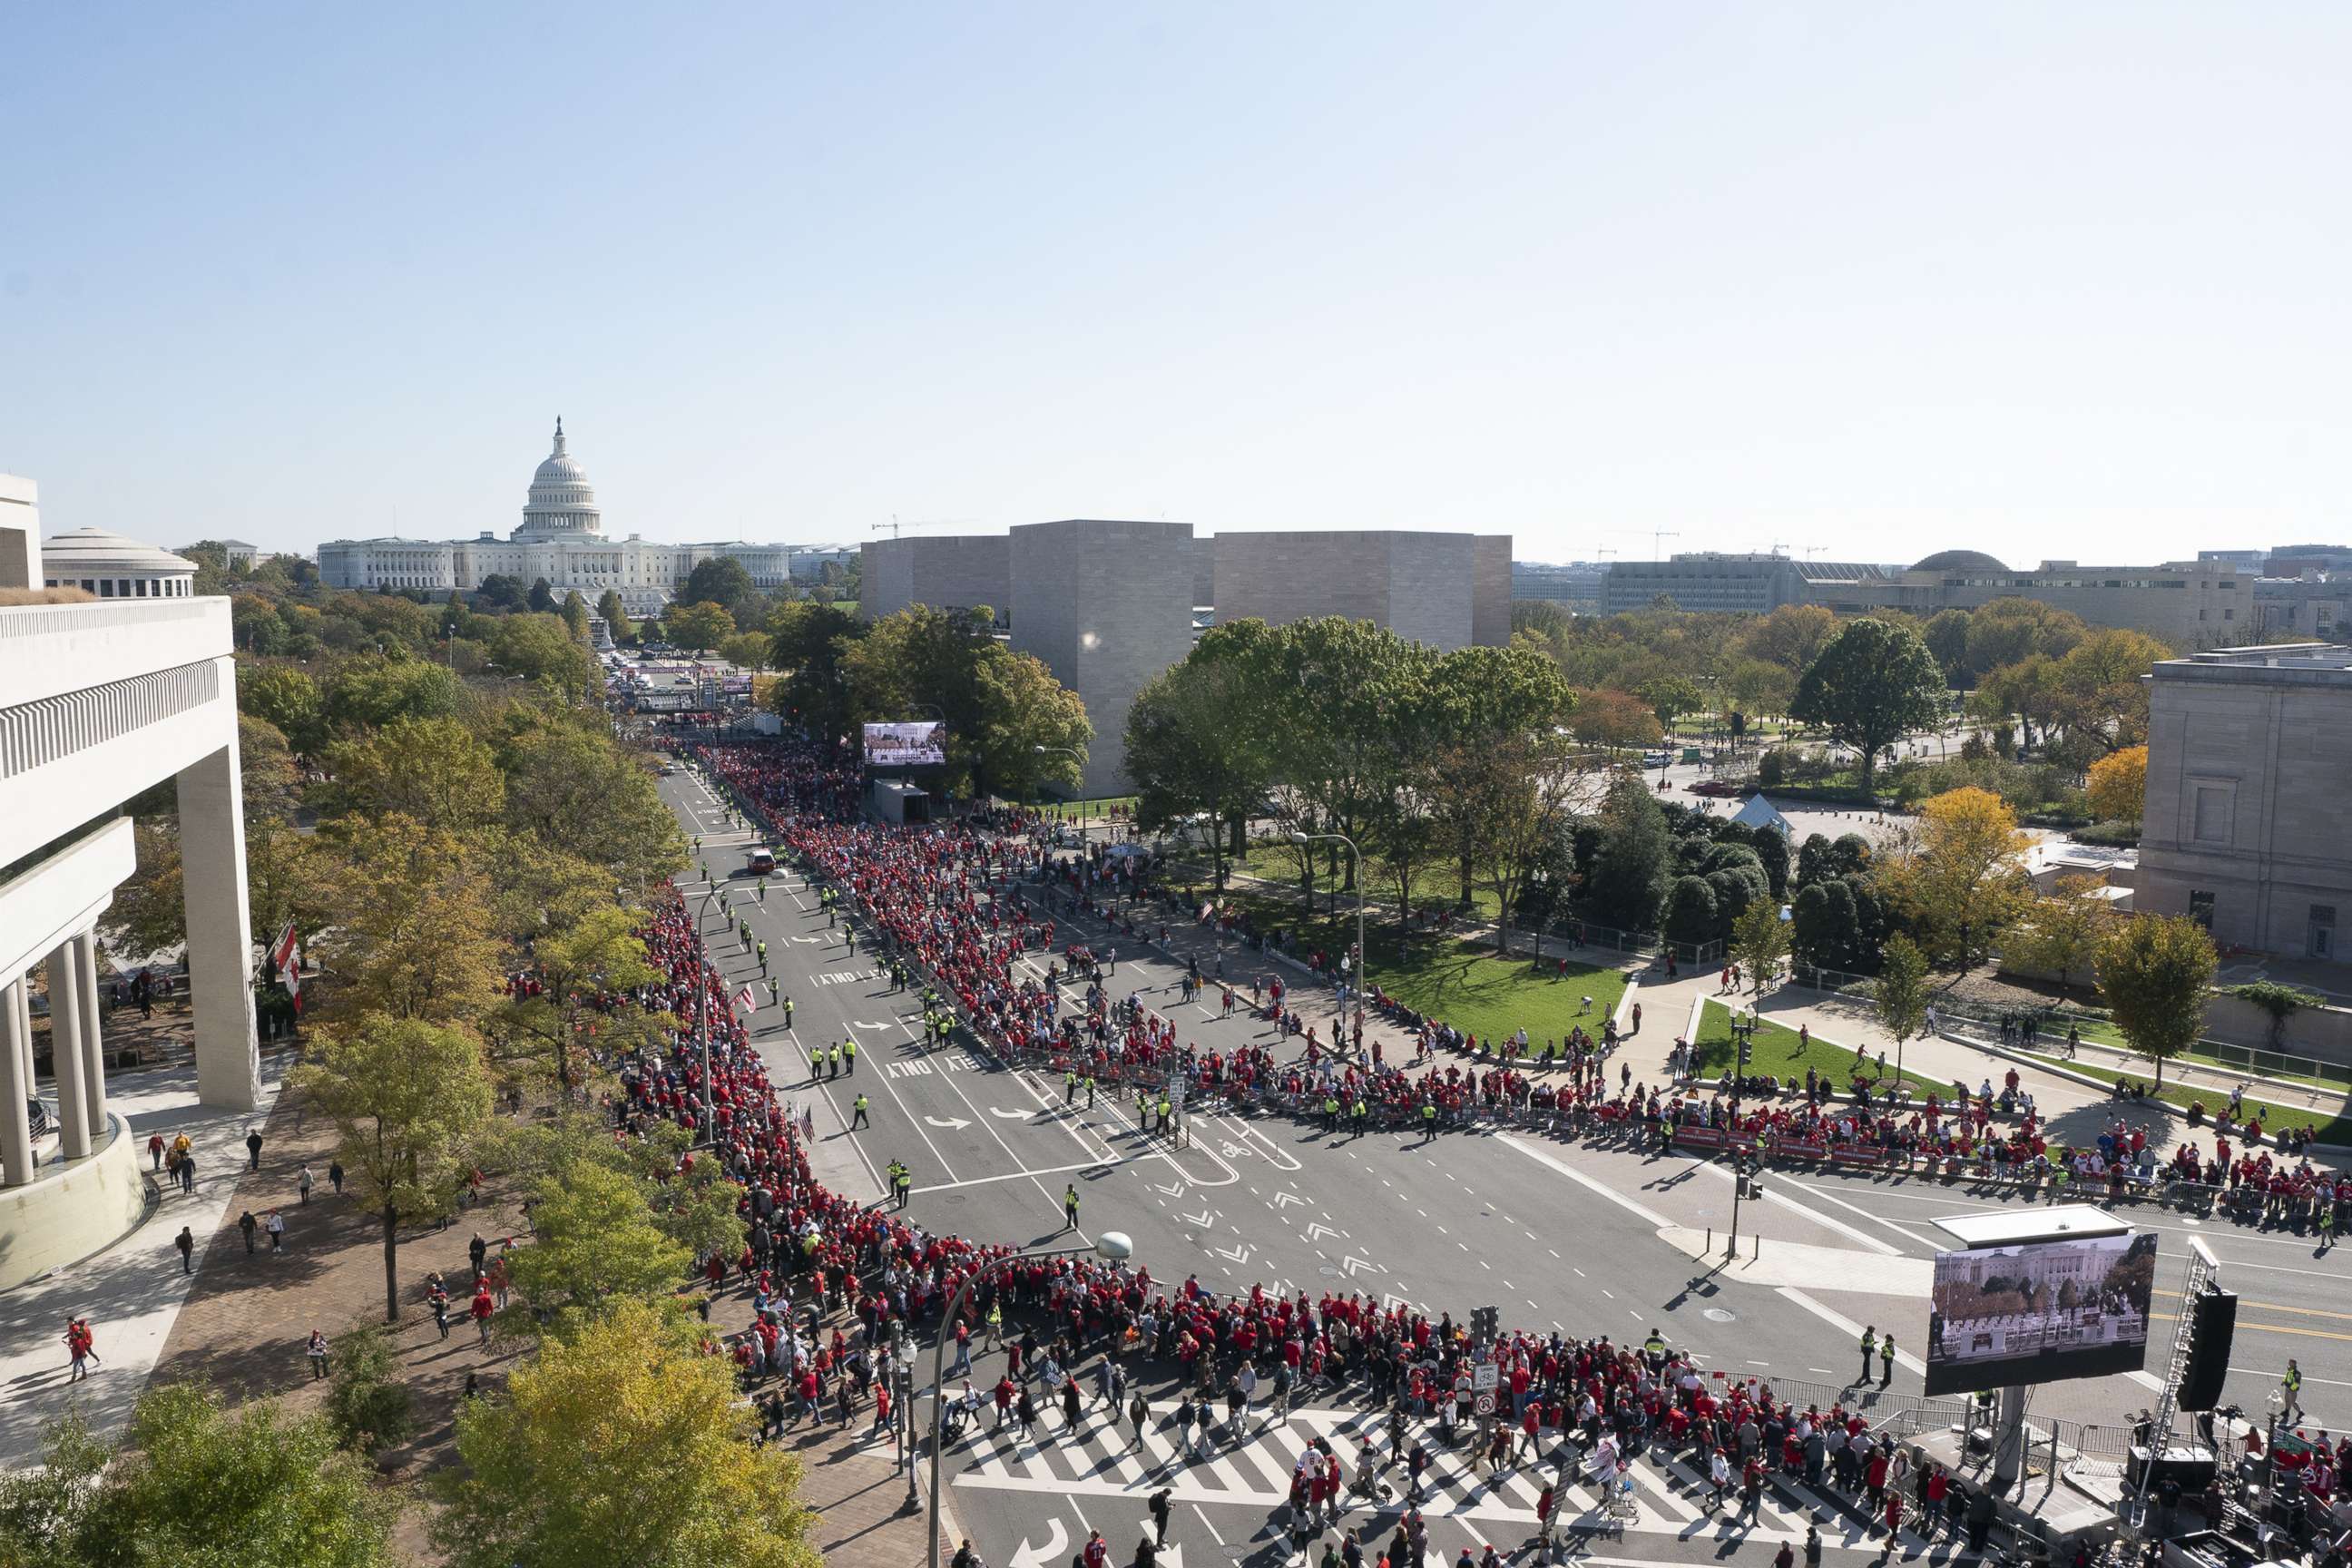 PHOTO: Fans gather as the Washington Nationals hold a parade to celebrate their World Series victory over the Houston Astros on November 2, 2019 in Washington, DC.